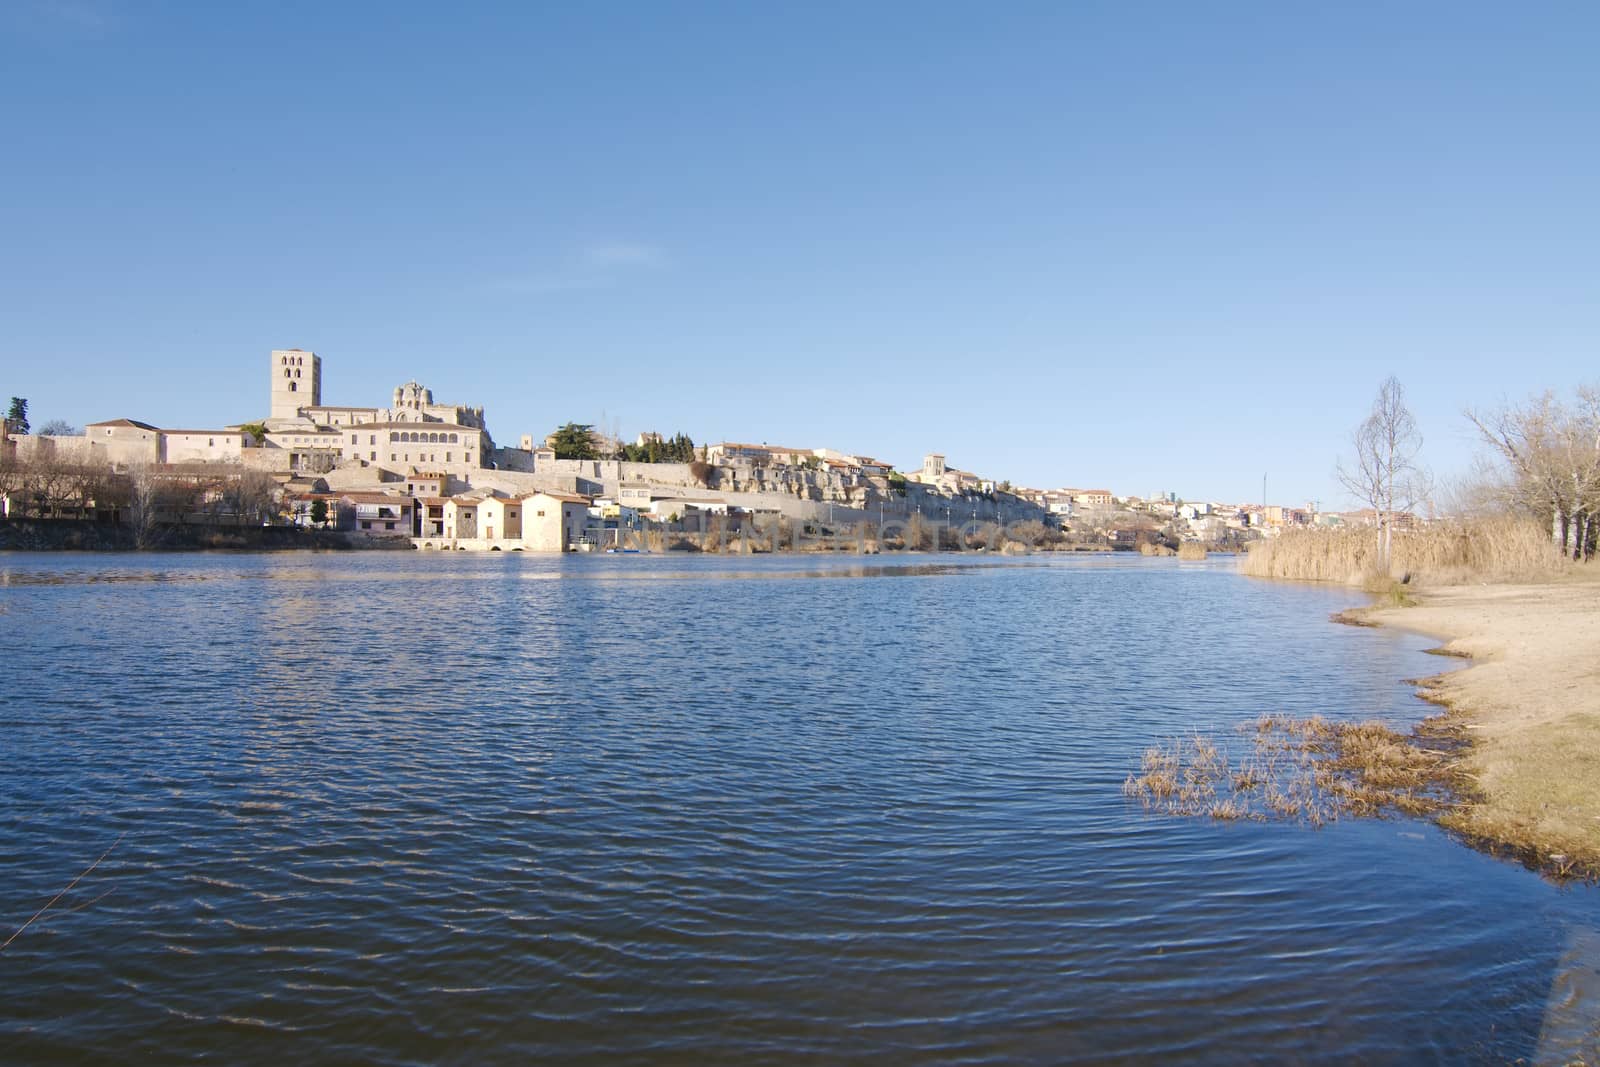 View of the city of Zamora and Douro river.